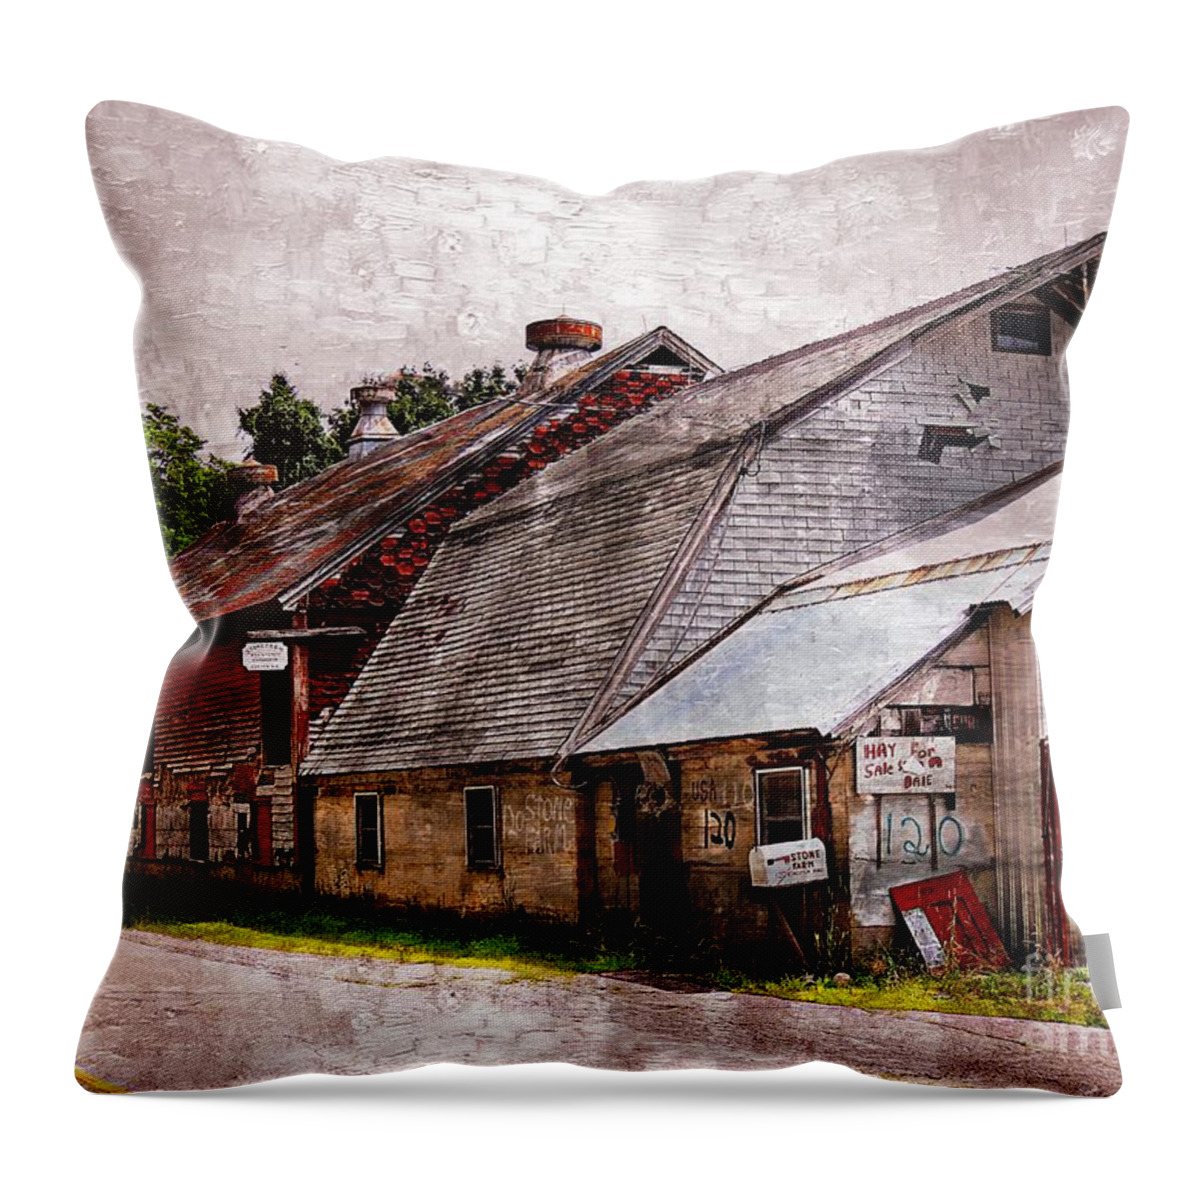 Architecture Throw Pillow featuring the photograph A Barn With Many Purposes by Marcia Lee Jones